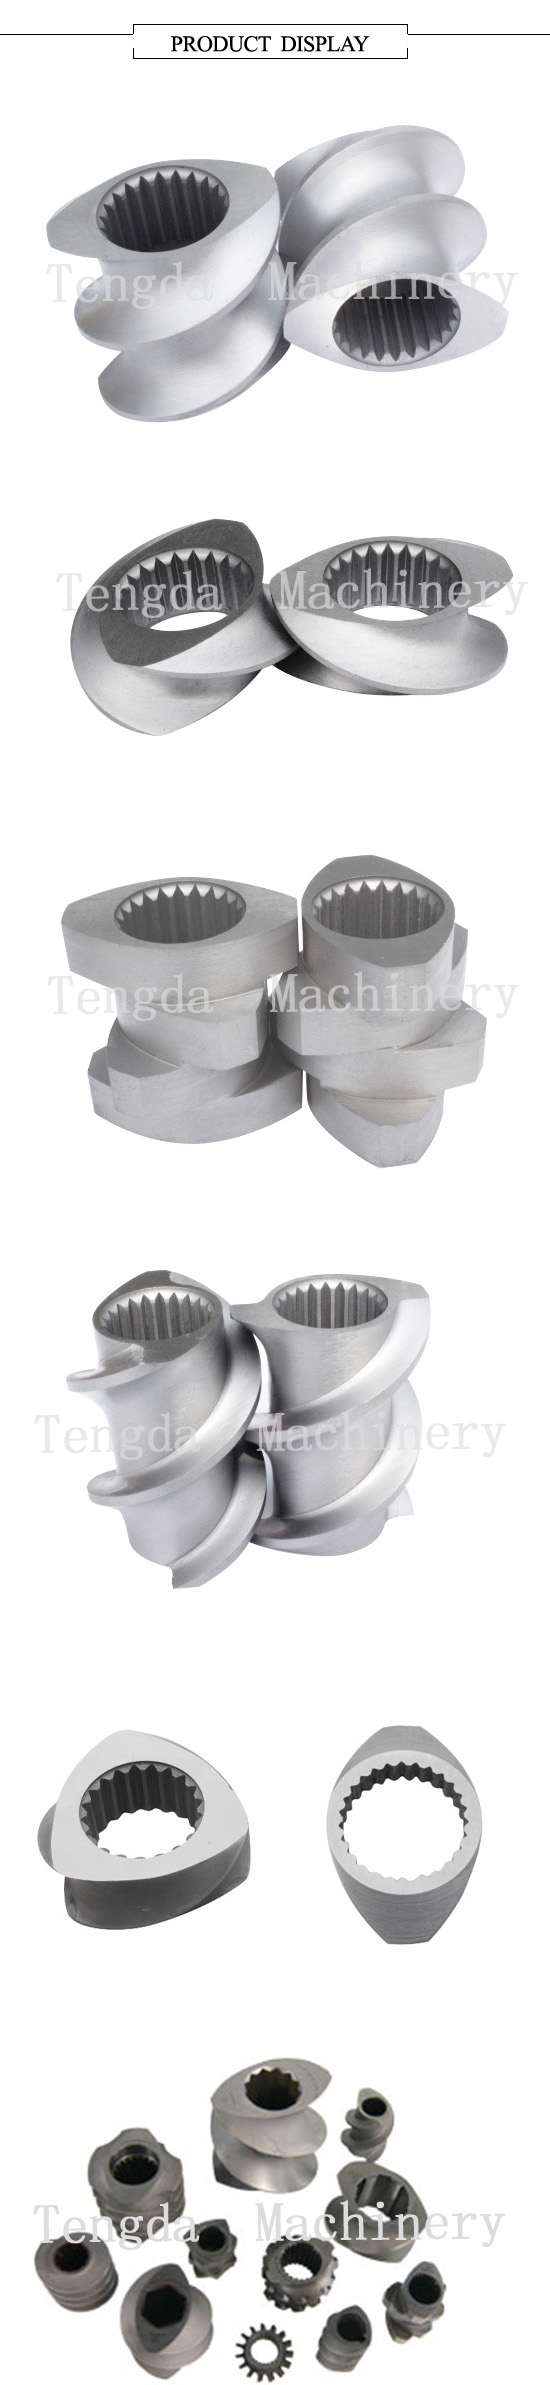 Spare Part Screw Element for Double-Screw Screw Extruder